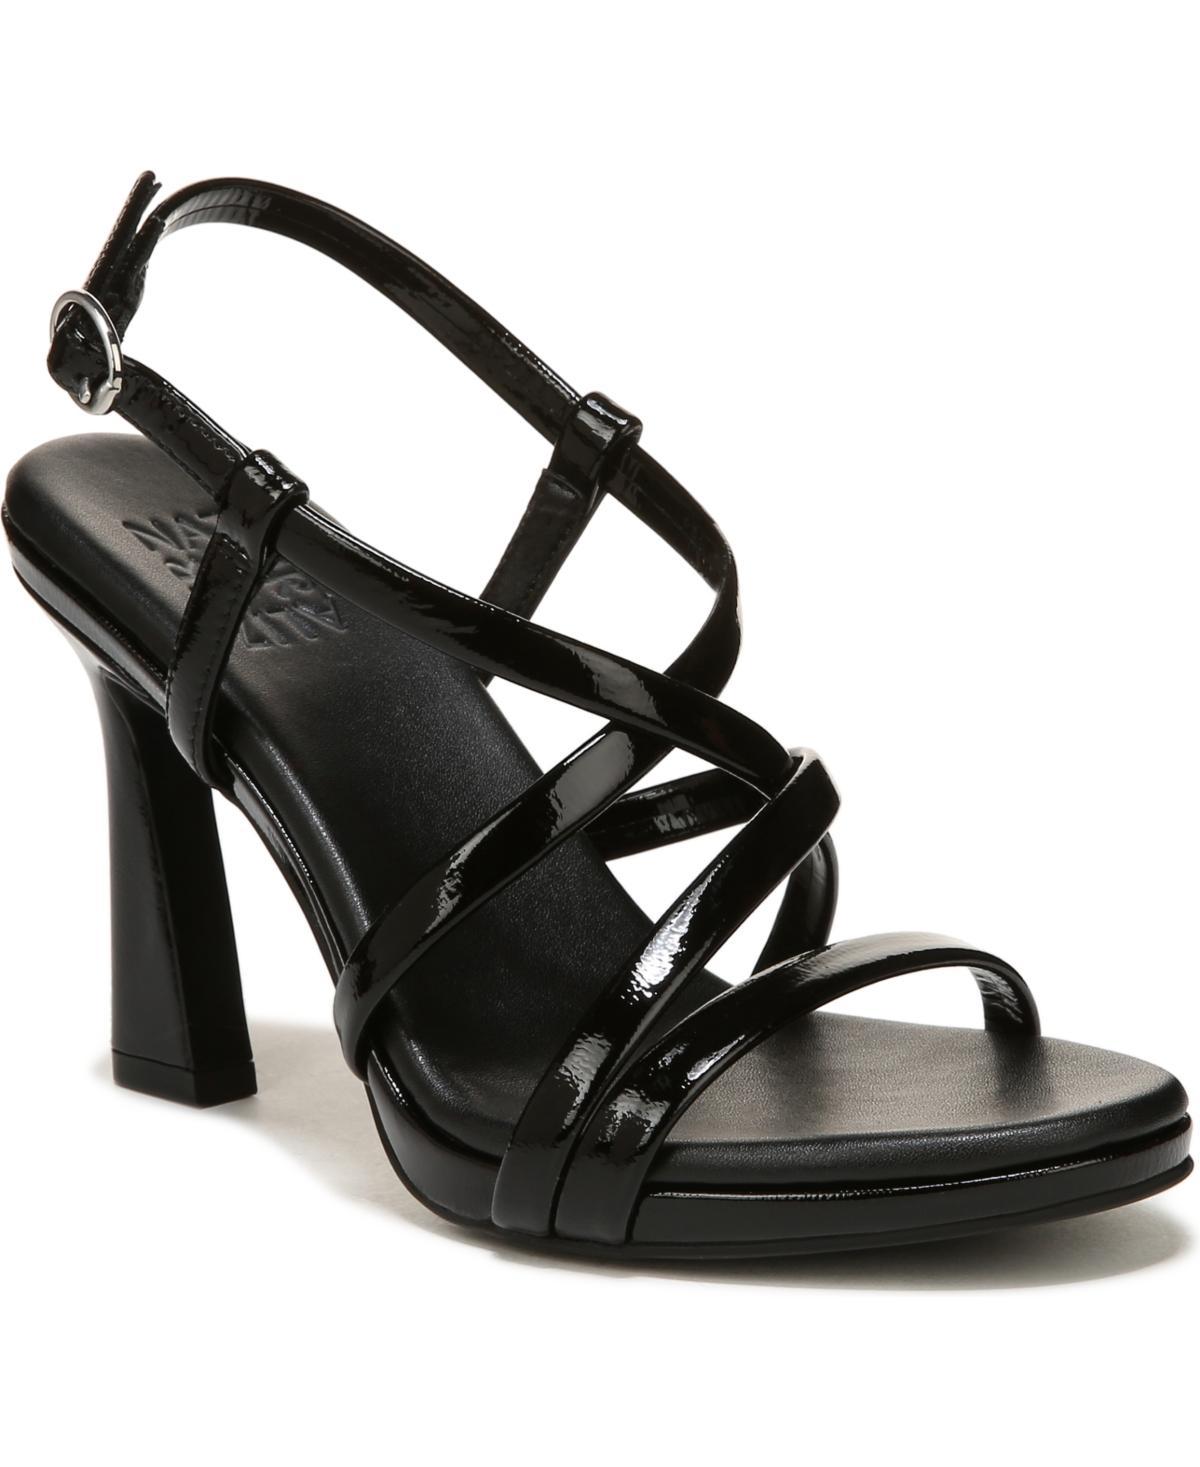 Naturalizer Luisa Strappy Patent Leather Dress Sandals Product Image